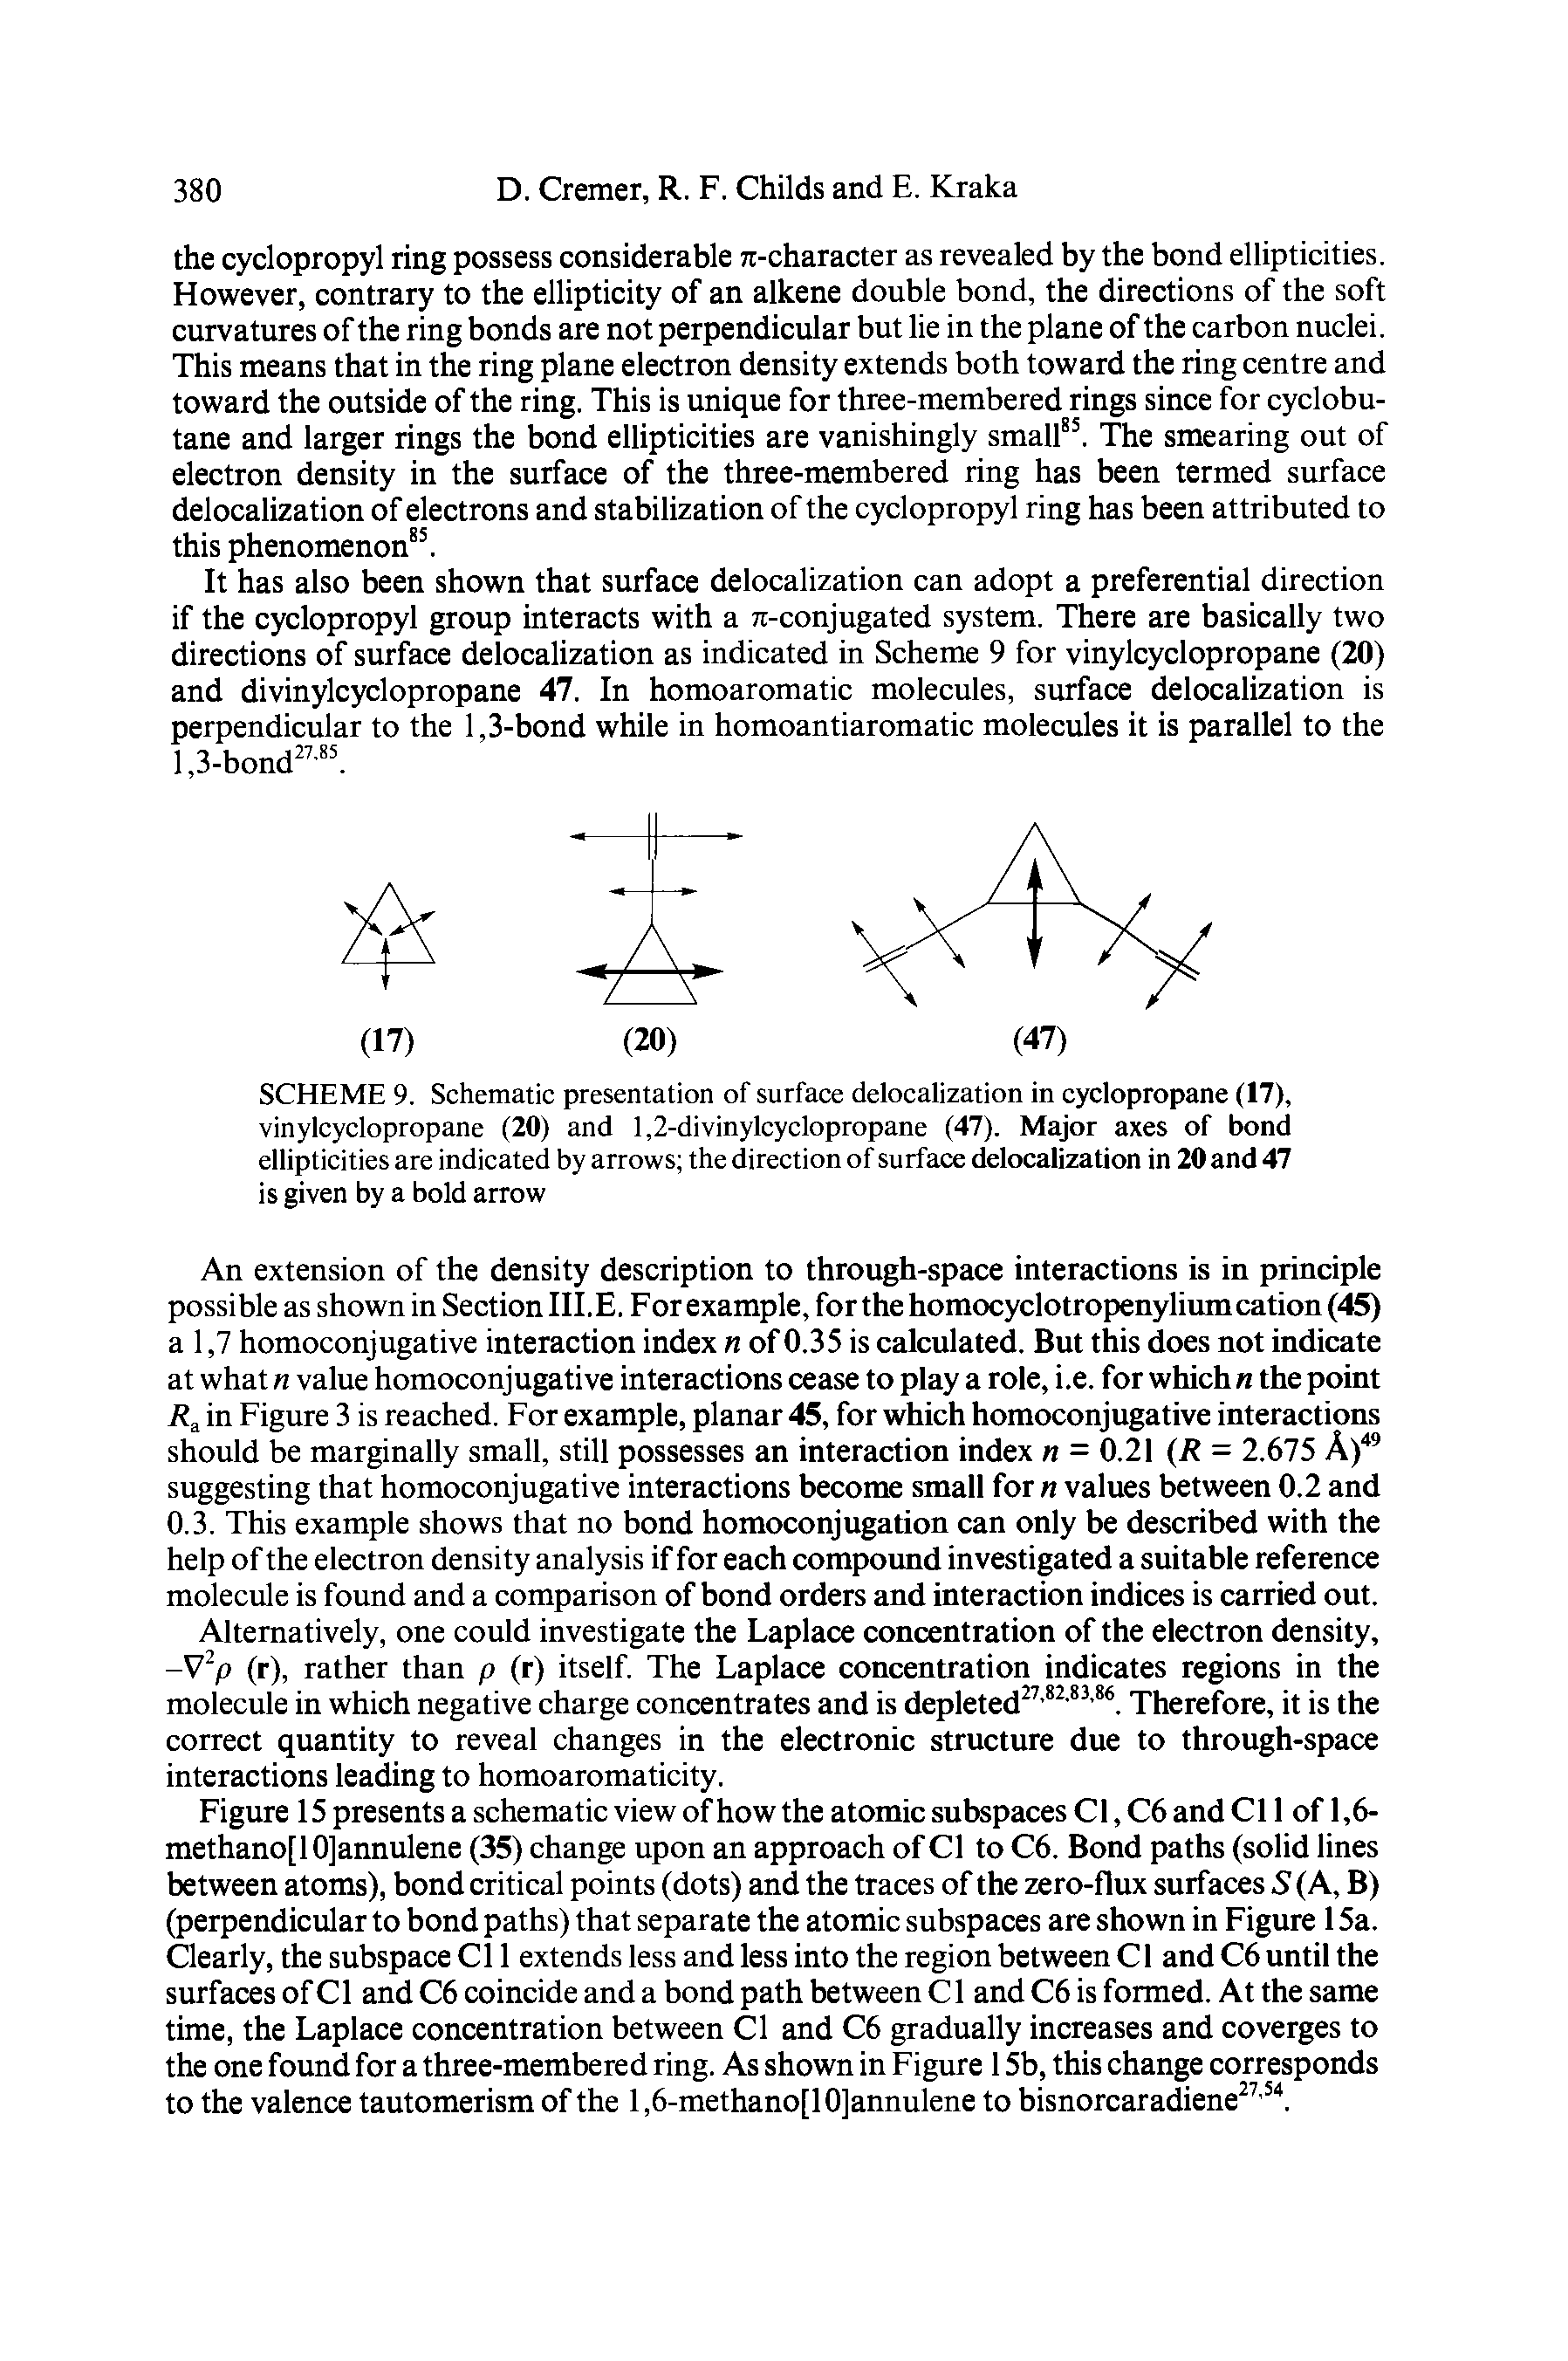 Figure 15 presents a schematic view of how the atomic subspaces Cl, C6 and Cl 1 of 1,6-methanojl Ojannulene (35) change upon an approach of Cl to C6. Bond paths (solid lines between atoms), bond critical points (dots) and the traces of the zero-flux surfaces S (A, B) (perpendicular to bond paths) that separate the atomic subspaces are shown in Figure 15a. Clearly, the subspace C11 extends less and less into the region between C1 and C6 until the surfaces of C1 and C6 coincide and a bond path between C1 and C6 is formed. At the same time, the Laplace concentration between Cl and C6 gradually increases and coverges to the one found for a three-membered ring. As shown in Figure 15b, this change corresponds to the valence tautomerism of the l,6-methano[10]annulene to bisnorcaradiene27,54.